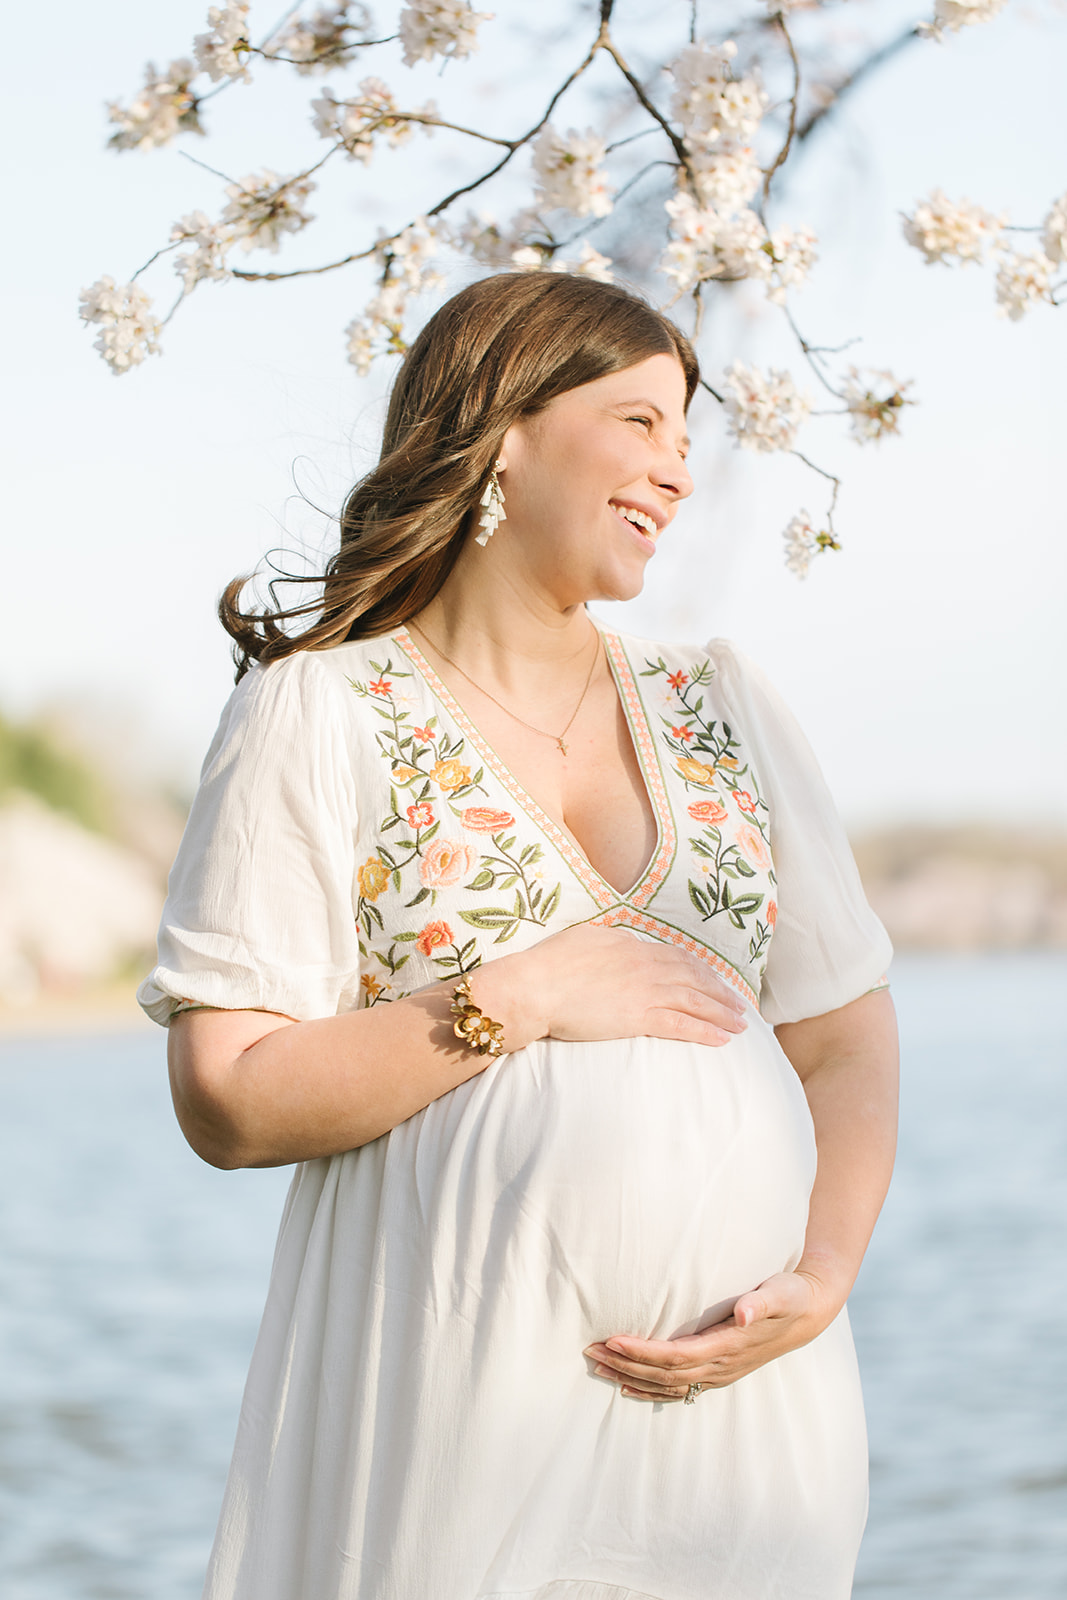 pregnant woman in white floral gown laughing during cherry blossom season Maternity Photography DC